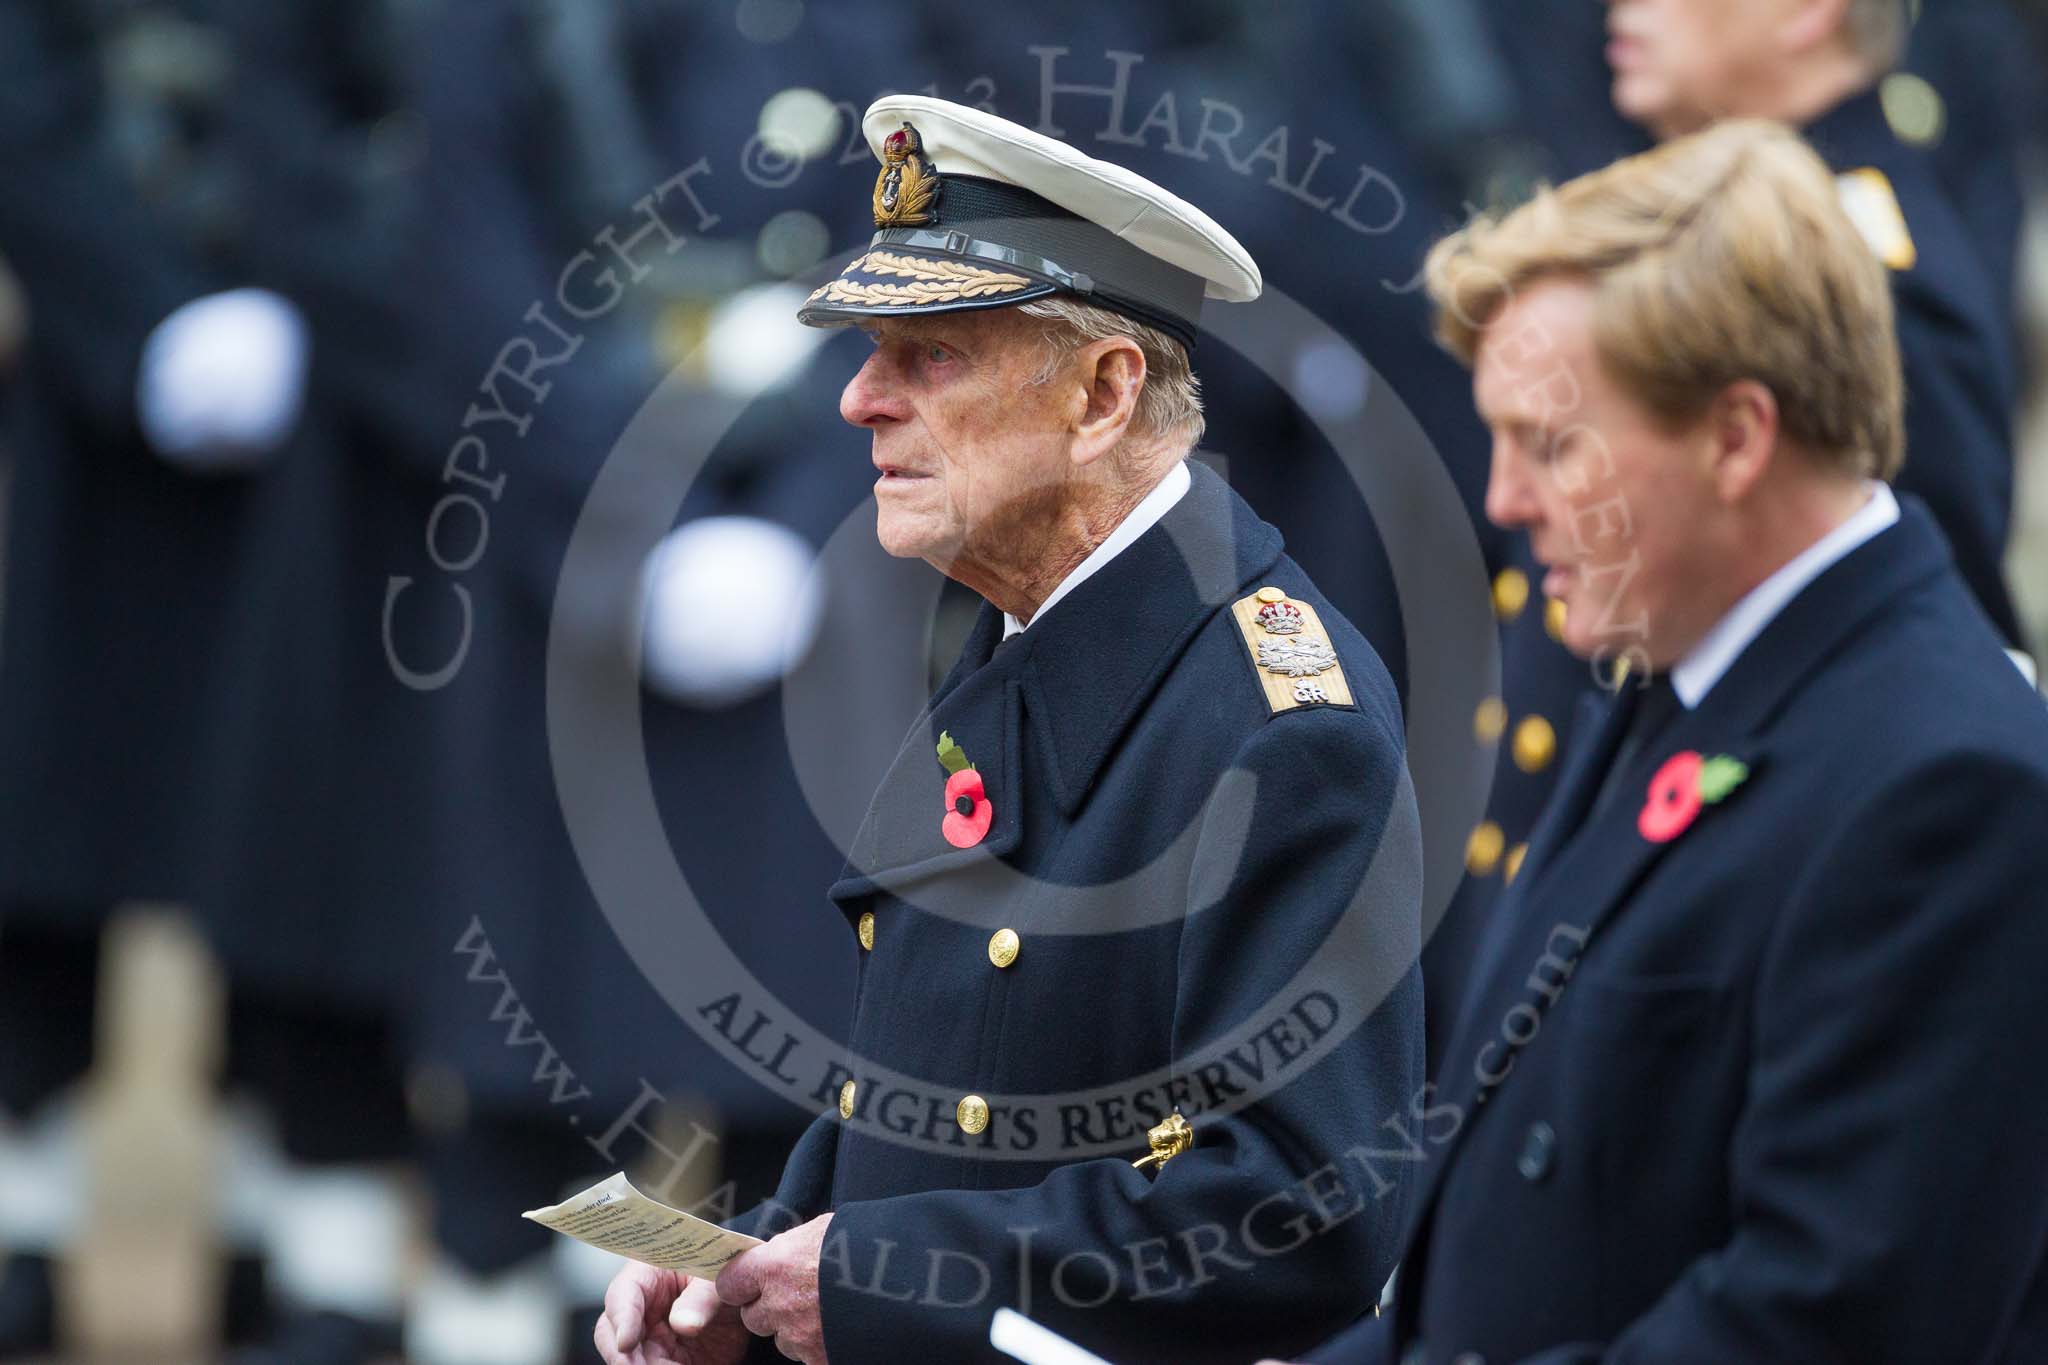 Remembrance Sunday at the Cenotaph 2015: HRH The Duke of Edinburgh during the service at the Cenotaph, in front HM The King of the Netherlands. Image #290, 08 November 2015 11:14 Whitehall, London, UK